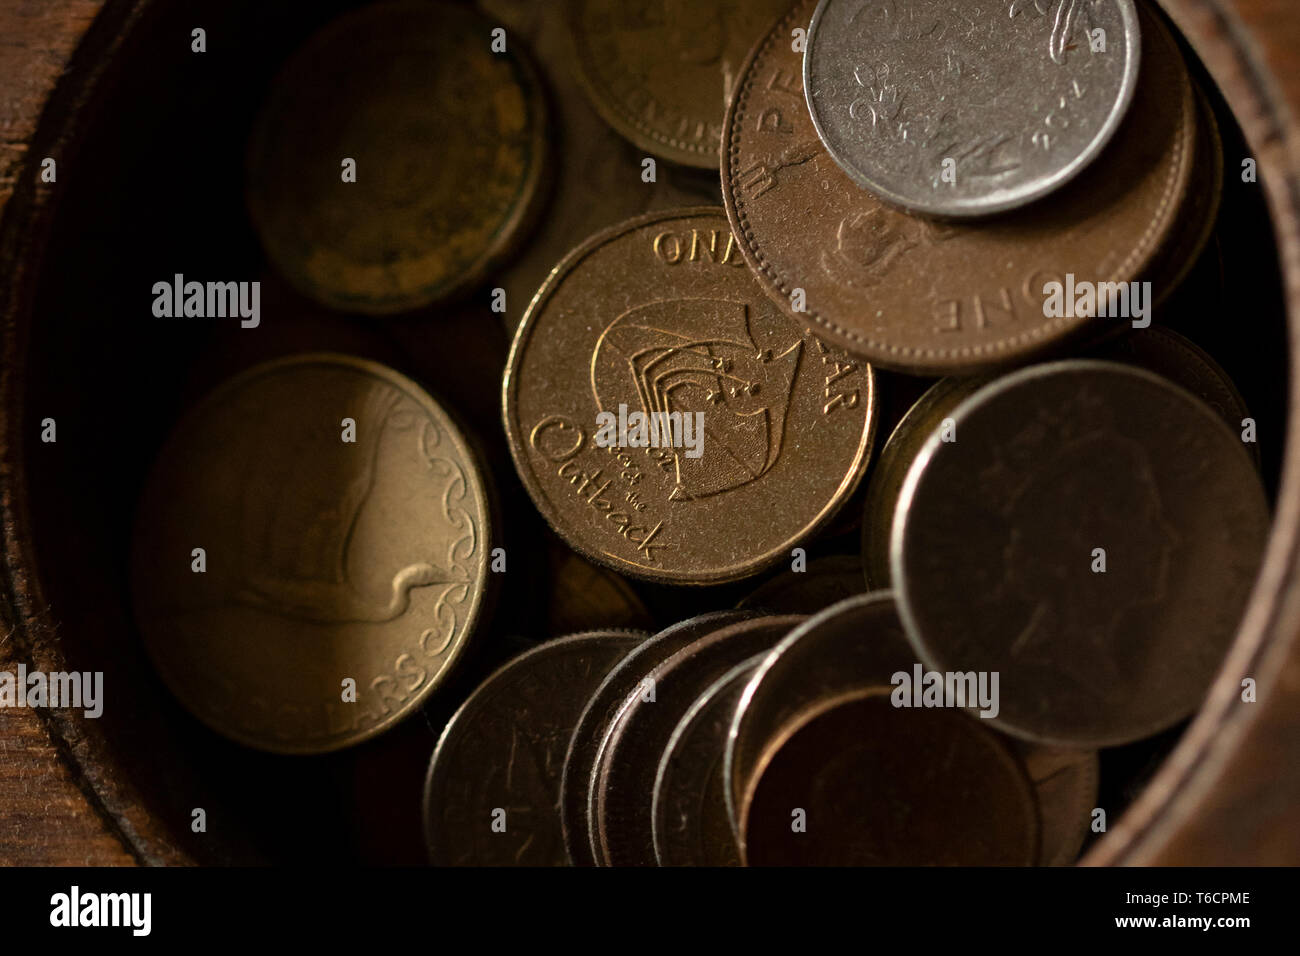 A wooden container full of foreign coins, including currency from Australia, Greece, and the United Kingdom. Stock Photo